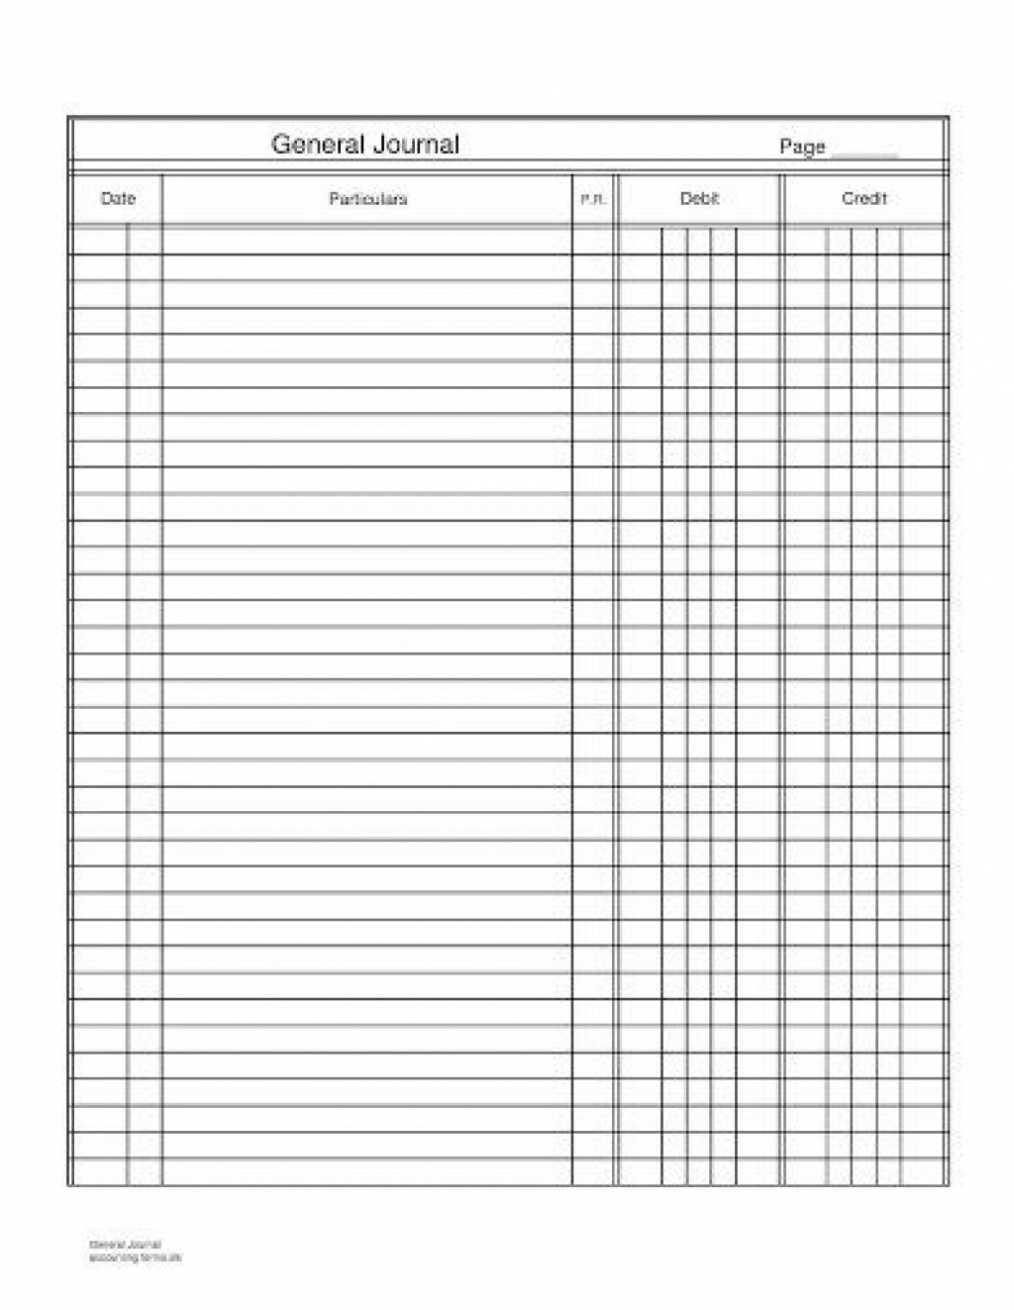 Accounting Journal Entry Template ~ Addictionary pertaining to Double Entry Journal Template For Word